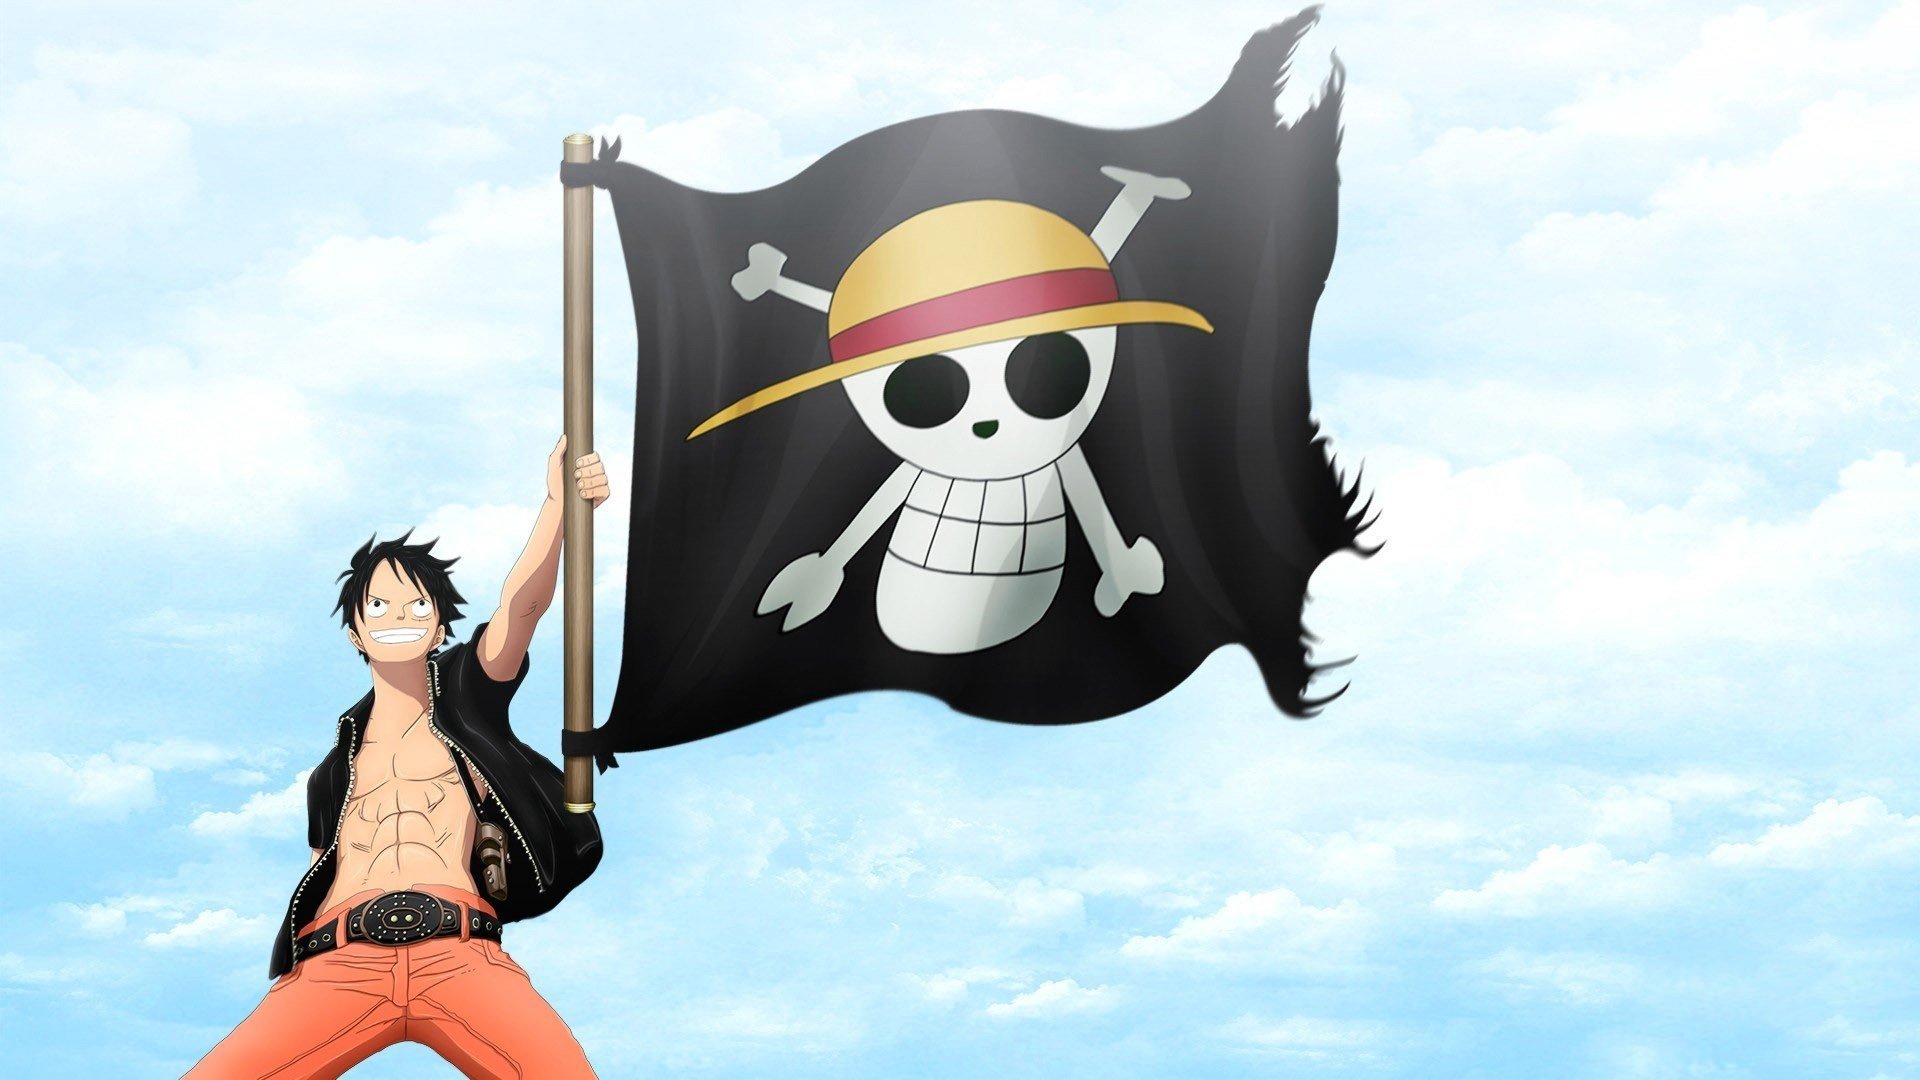 Download full hd 1920x1080 Monkey D. Luffy PC background ID:313987 for free